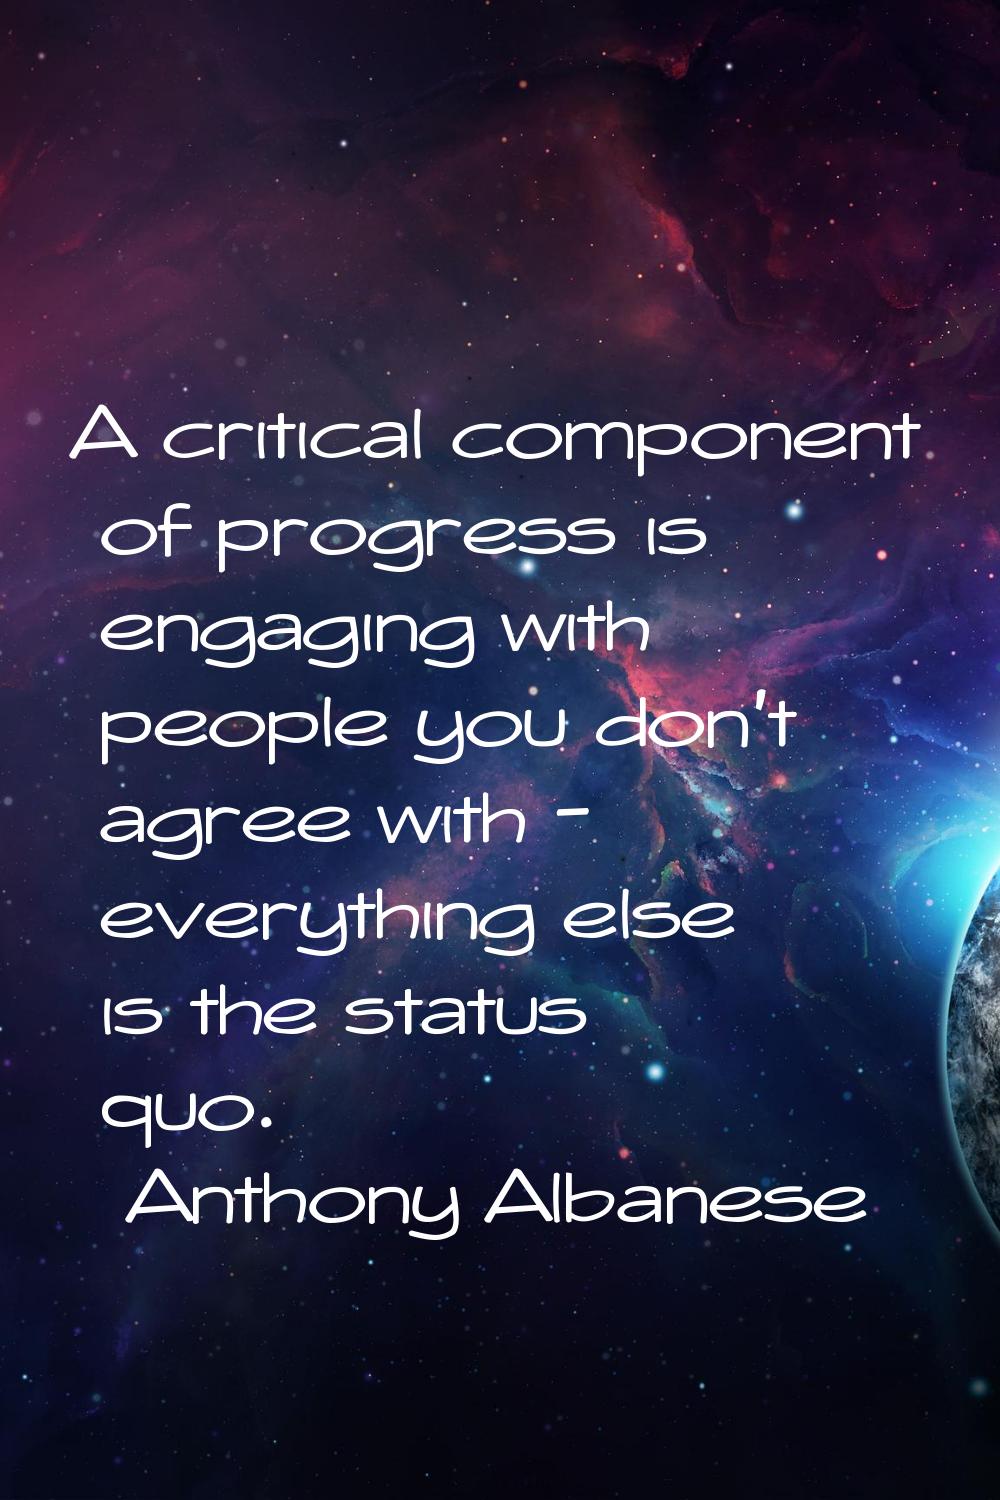 A critical component of progress is engaging with people you don't agree with - everything else is 